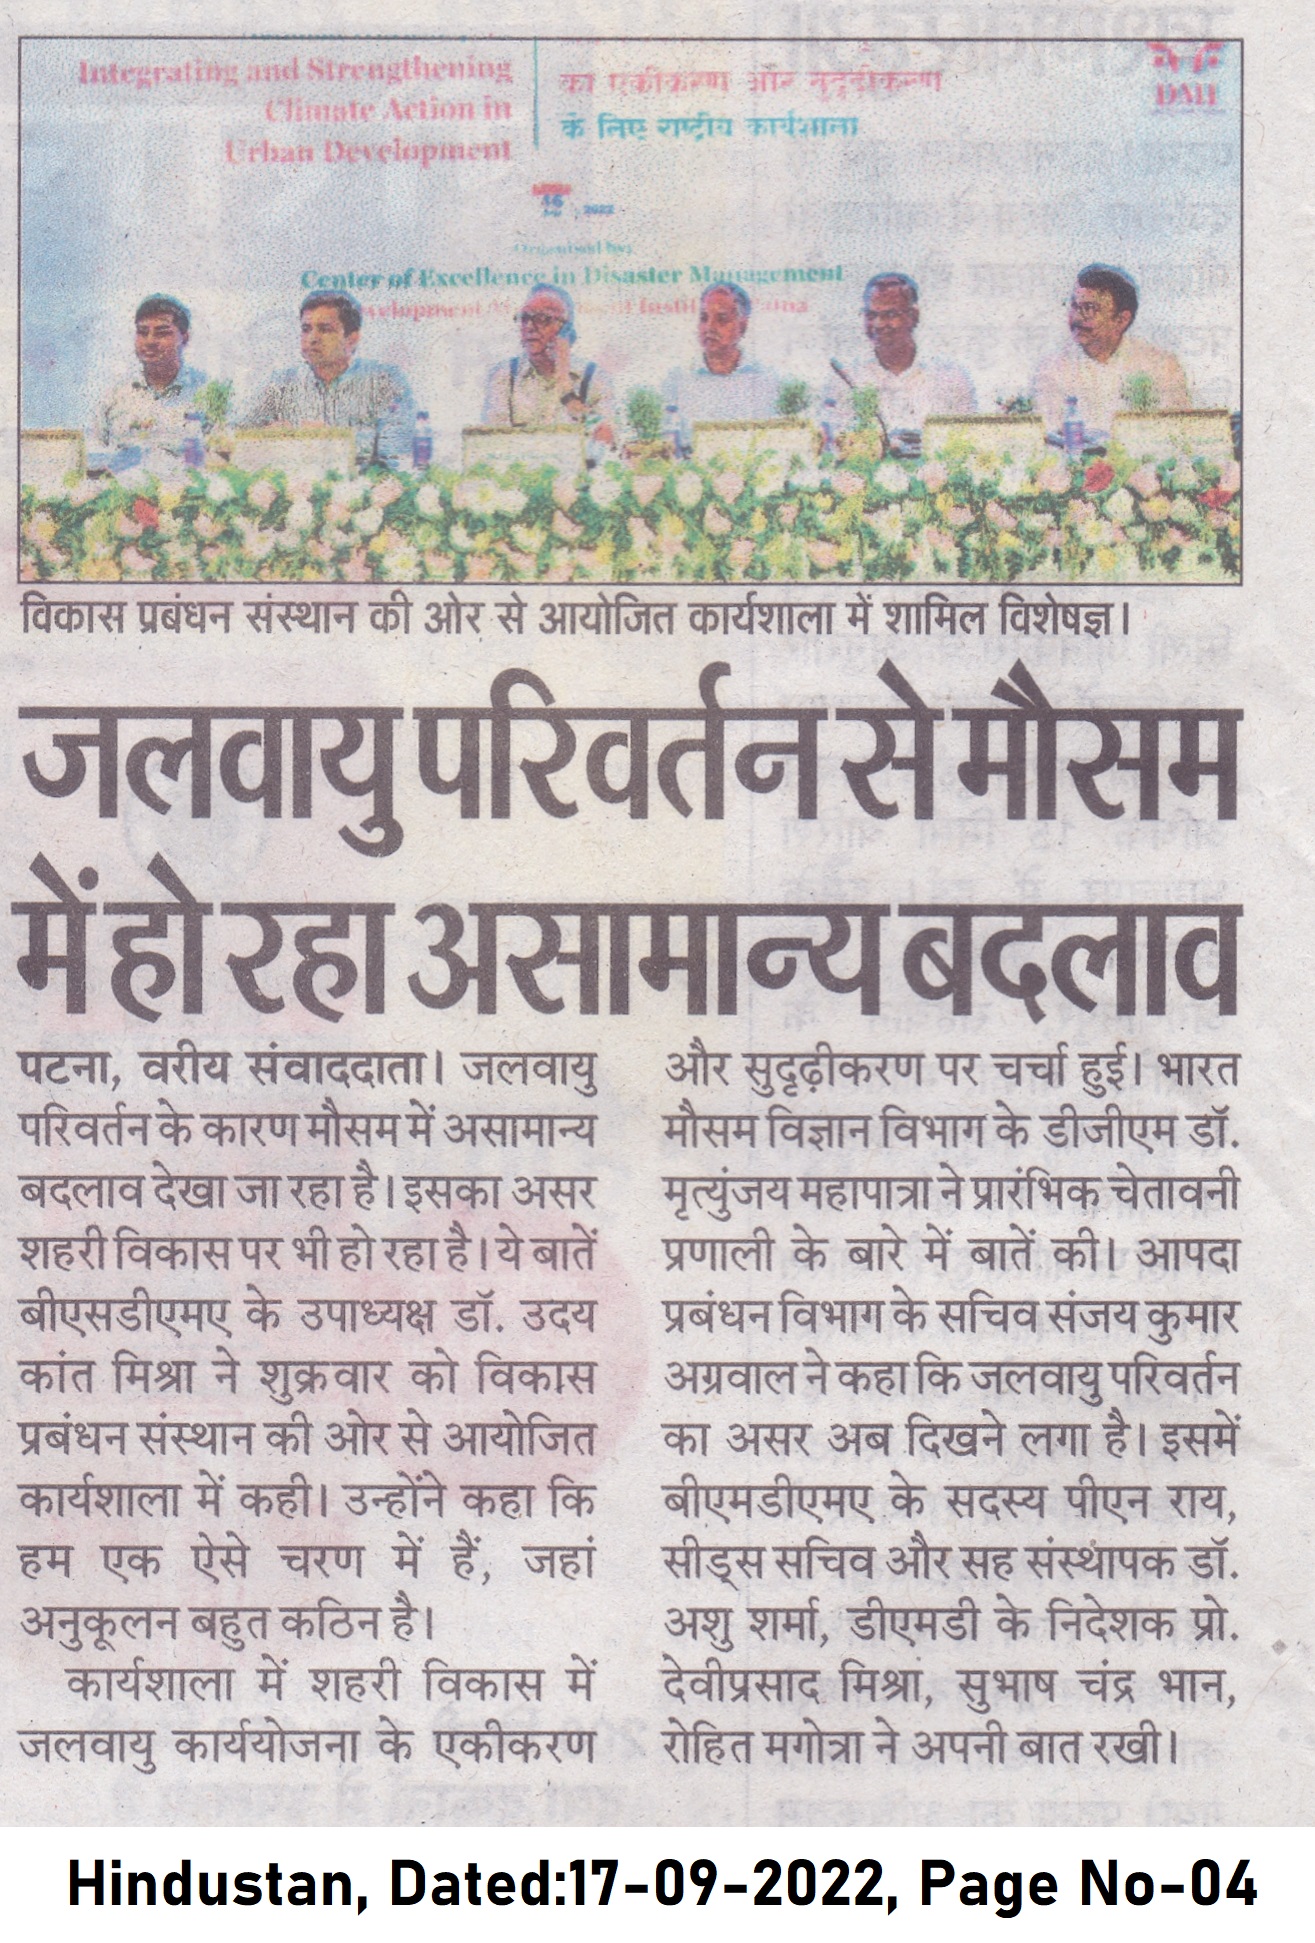  National workshop on ‘Integrating and Strengthening Climate Action in Urban Development-Hindustan 17-sep2022